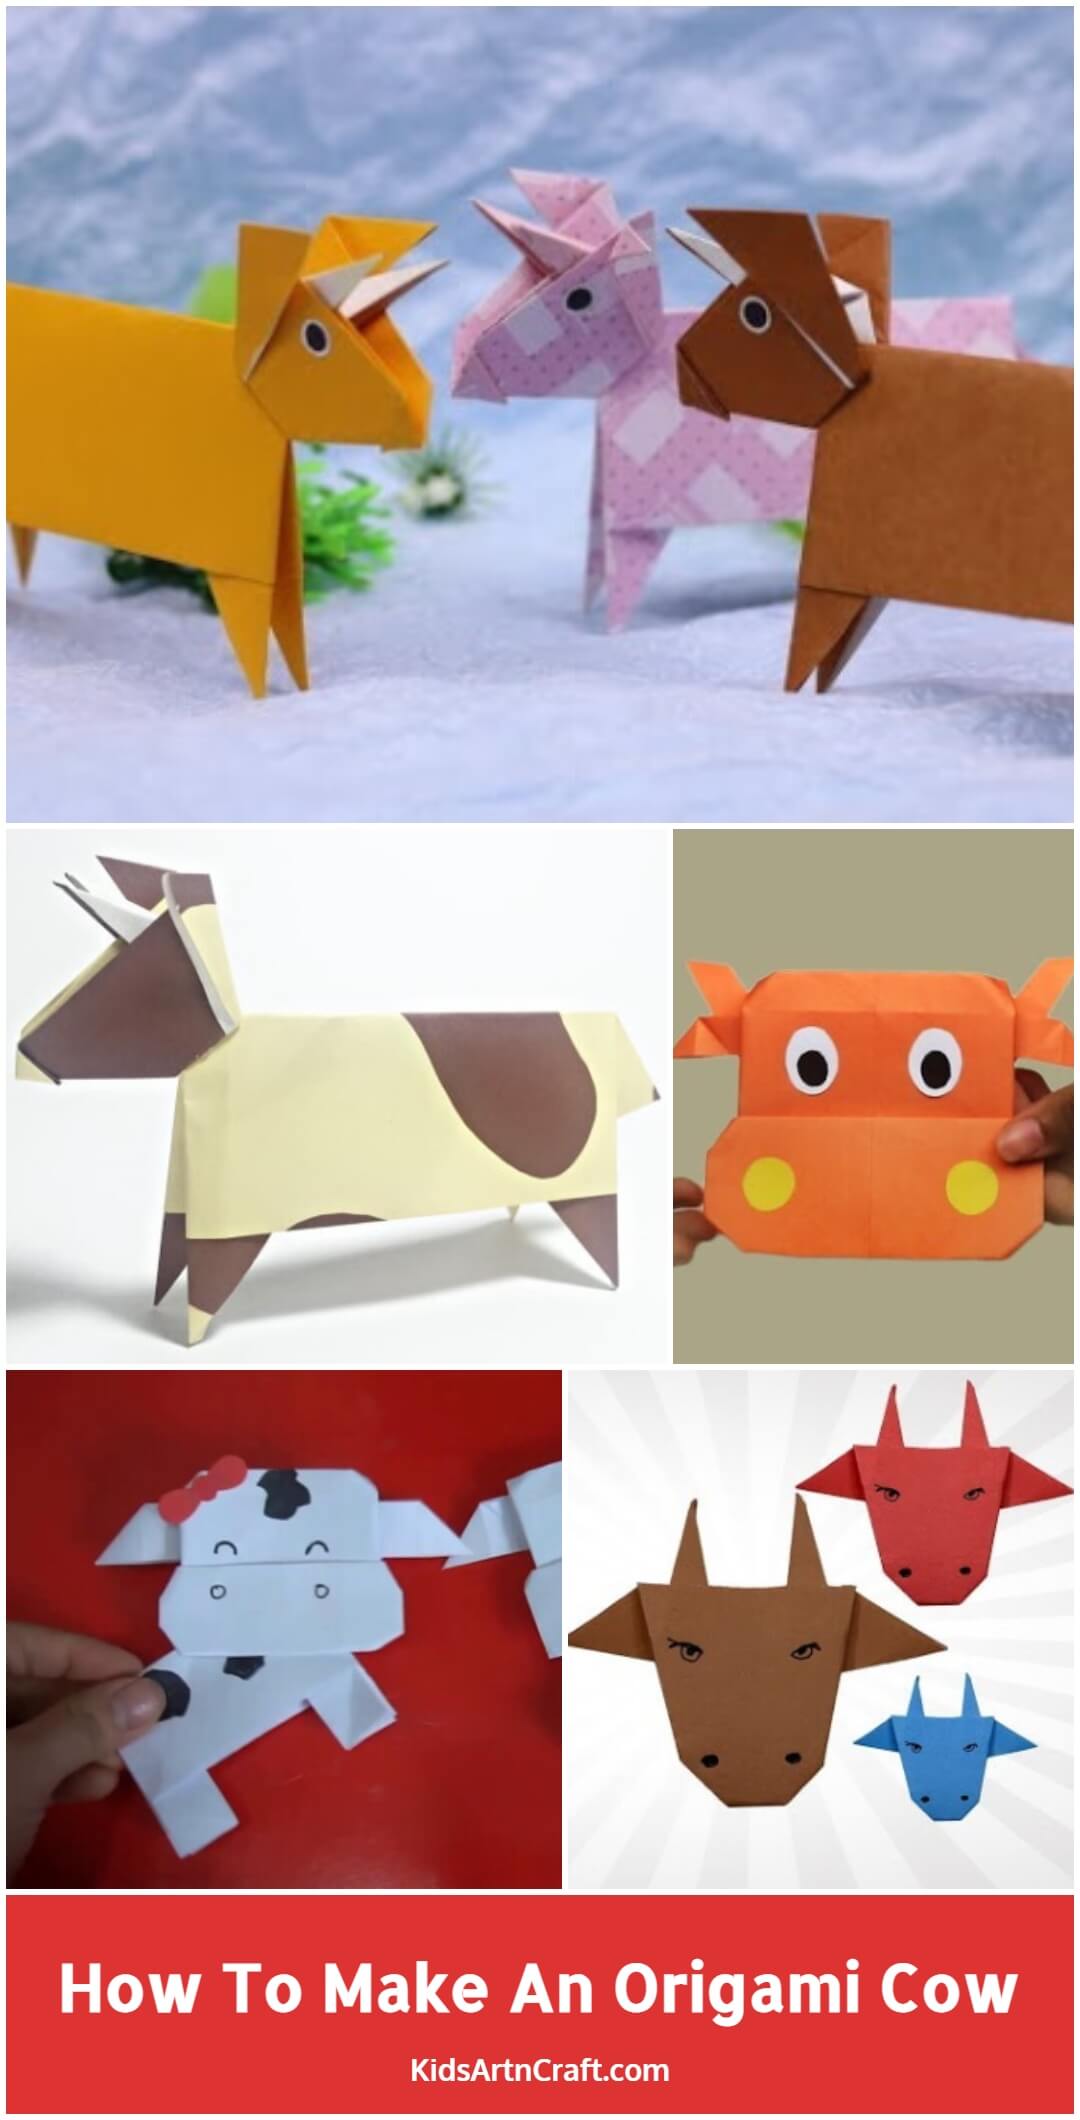 How To Make An Origami Cow With Kids